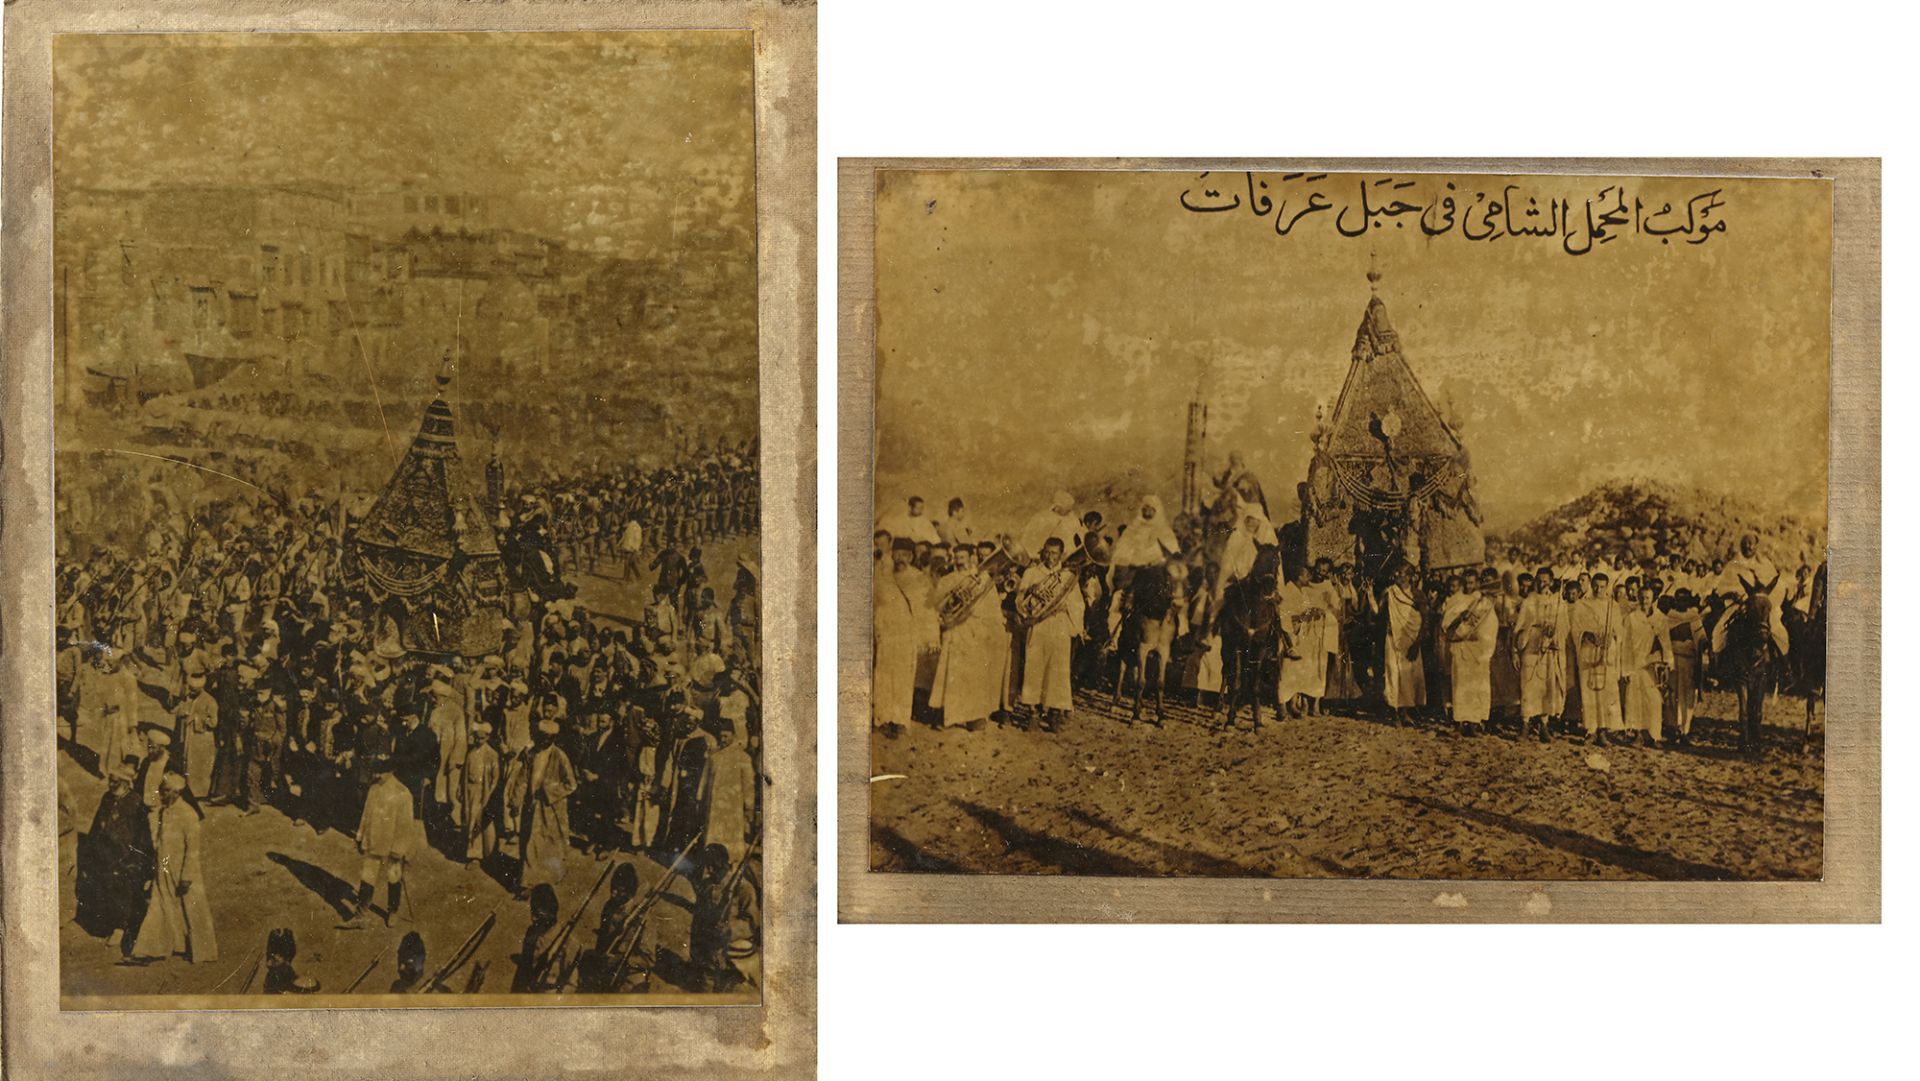 TWO OLD PHOTOGRAPHS OF THE MAHMAL DURING THE HAJJ, EARLY 20TH CENTURY